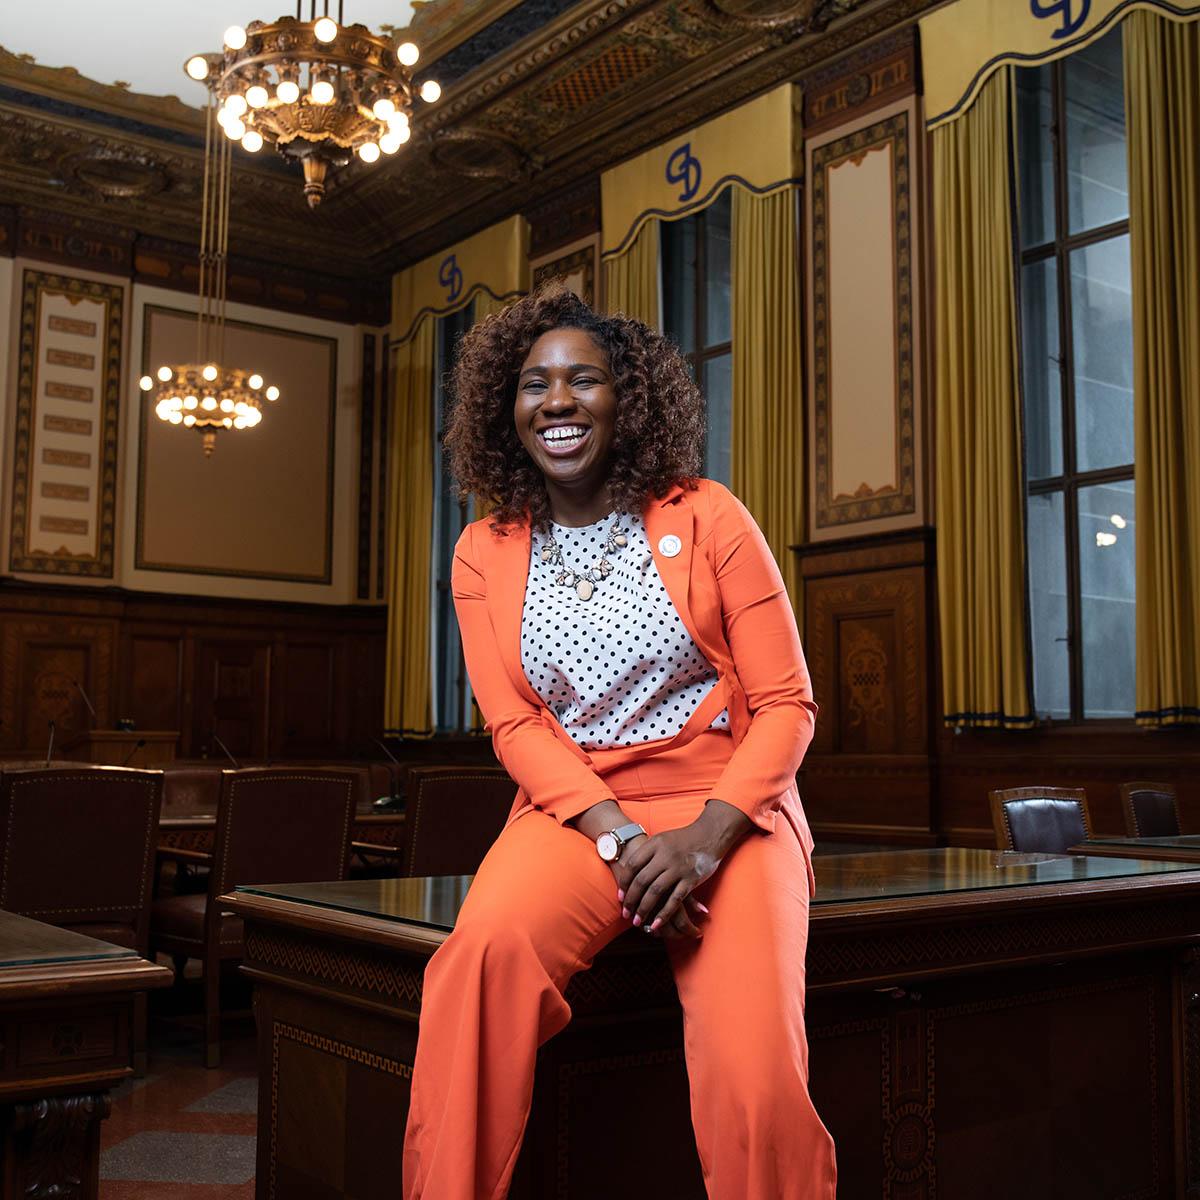 Photo of Feyisola, a young Black woman in a bright suit, poses smiling and laughing against a table in an ornate room